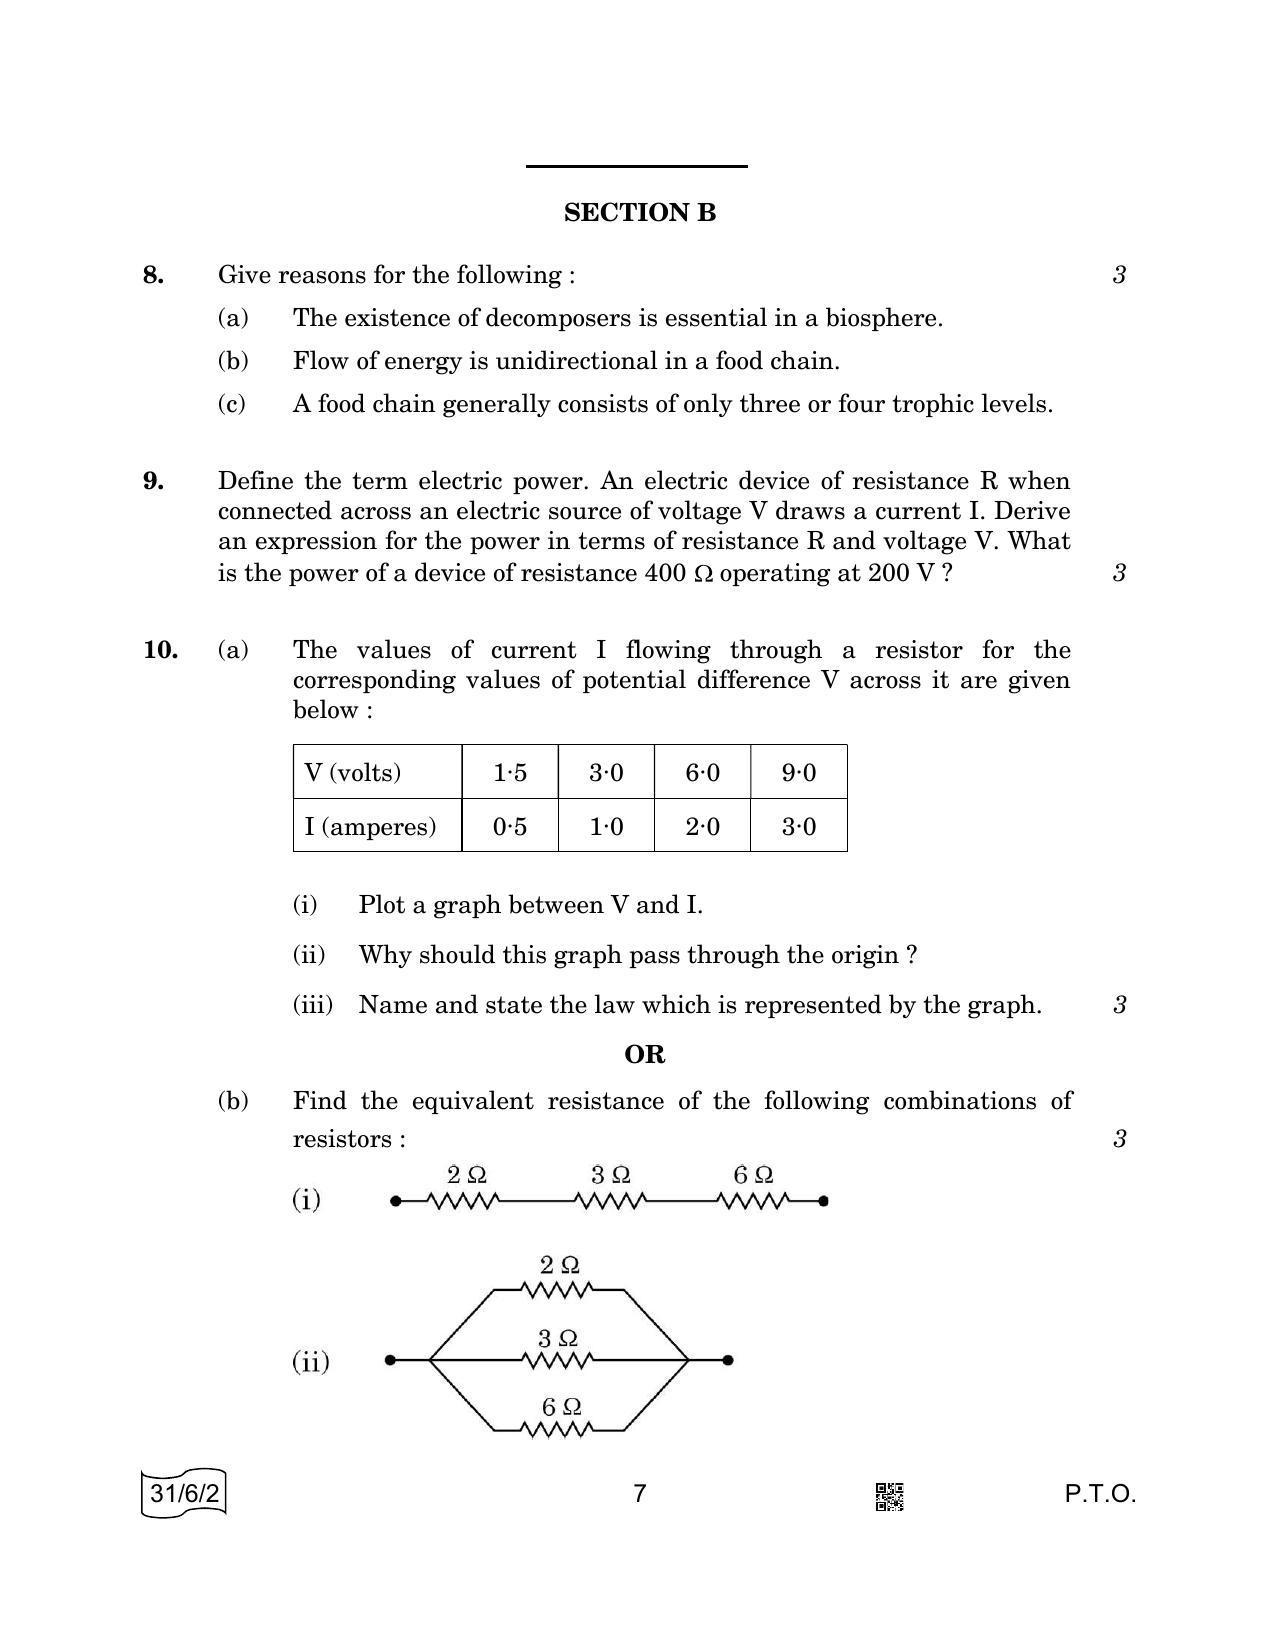 CBSE Class 10 31-6-2 SCIENCE 2022 Compartment Question Paper - Page 7